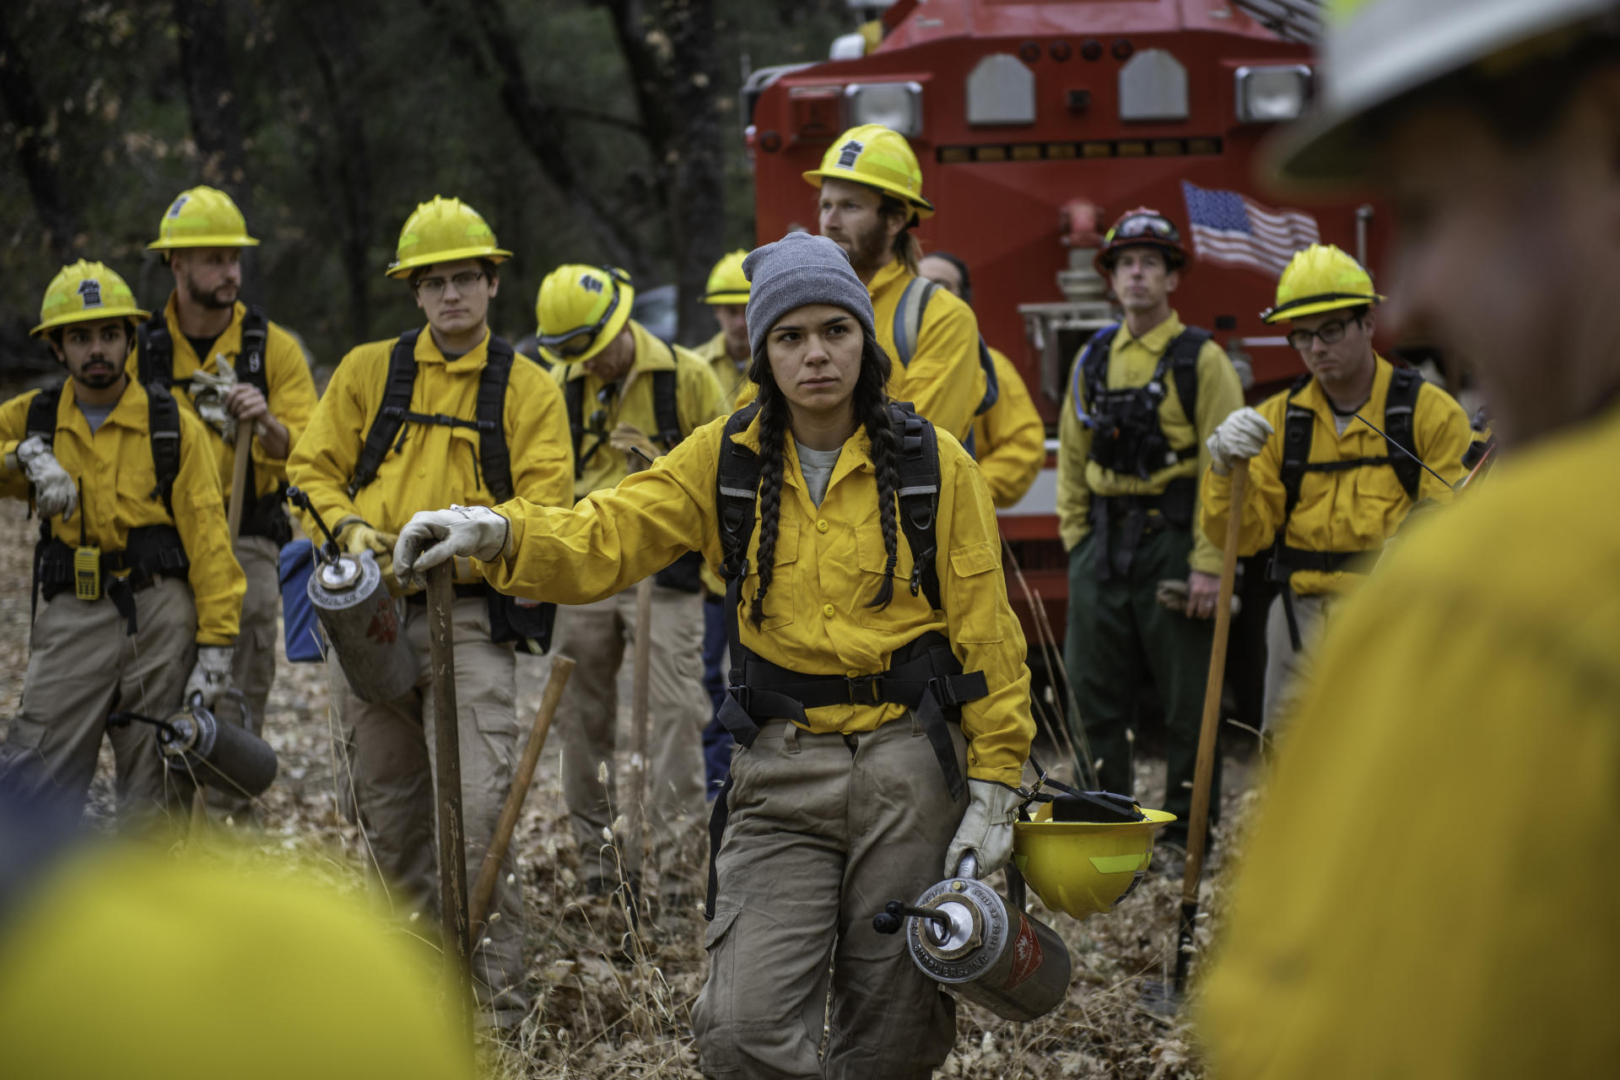 A group of college students wearing fire gear gather in a group and receive instructions.